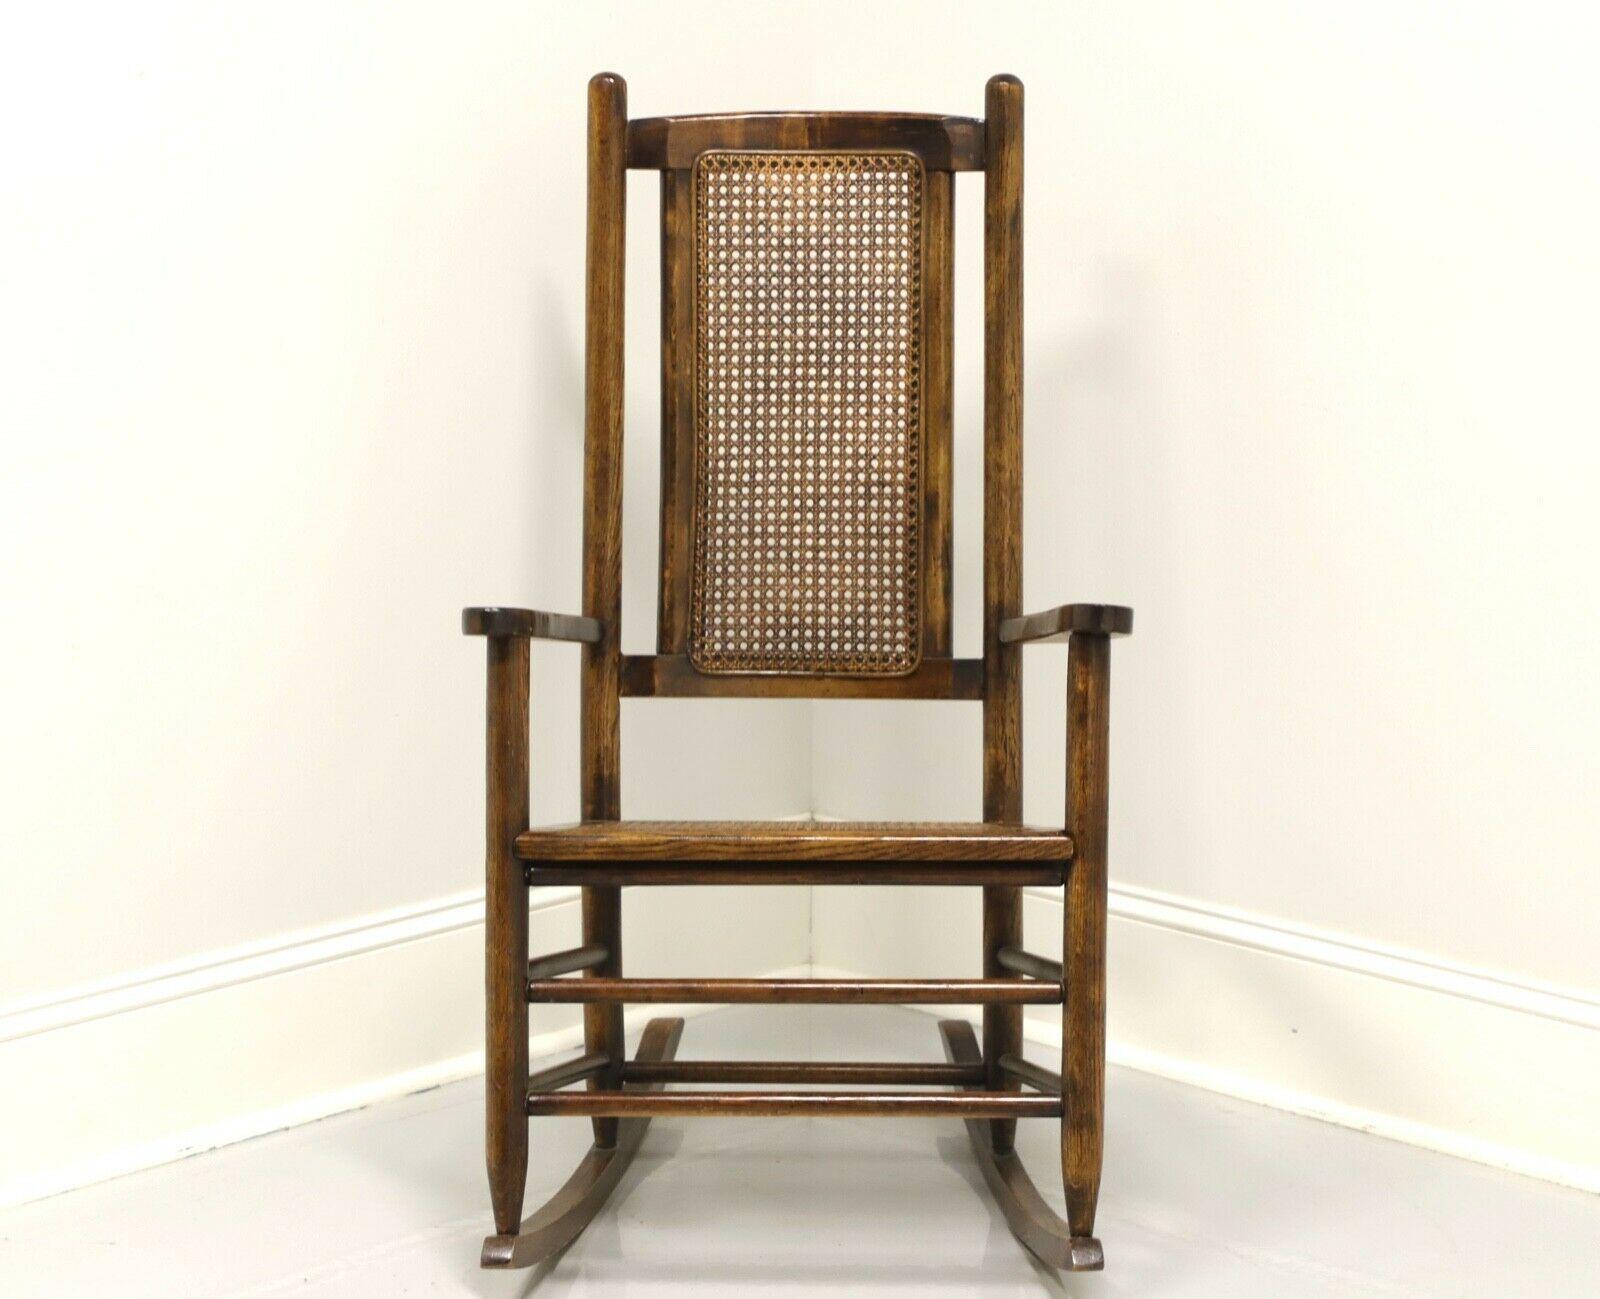 An antique American style rocking chair, unbranded. Solid oak with high back, flat arms and stretchers. Features a cane backrest and cane seat. Made in the USA, in the late 19th century. 

Measures: Overall: 23 W 29.75 D 41 H, Seat: 18.5 W 16.5 D